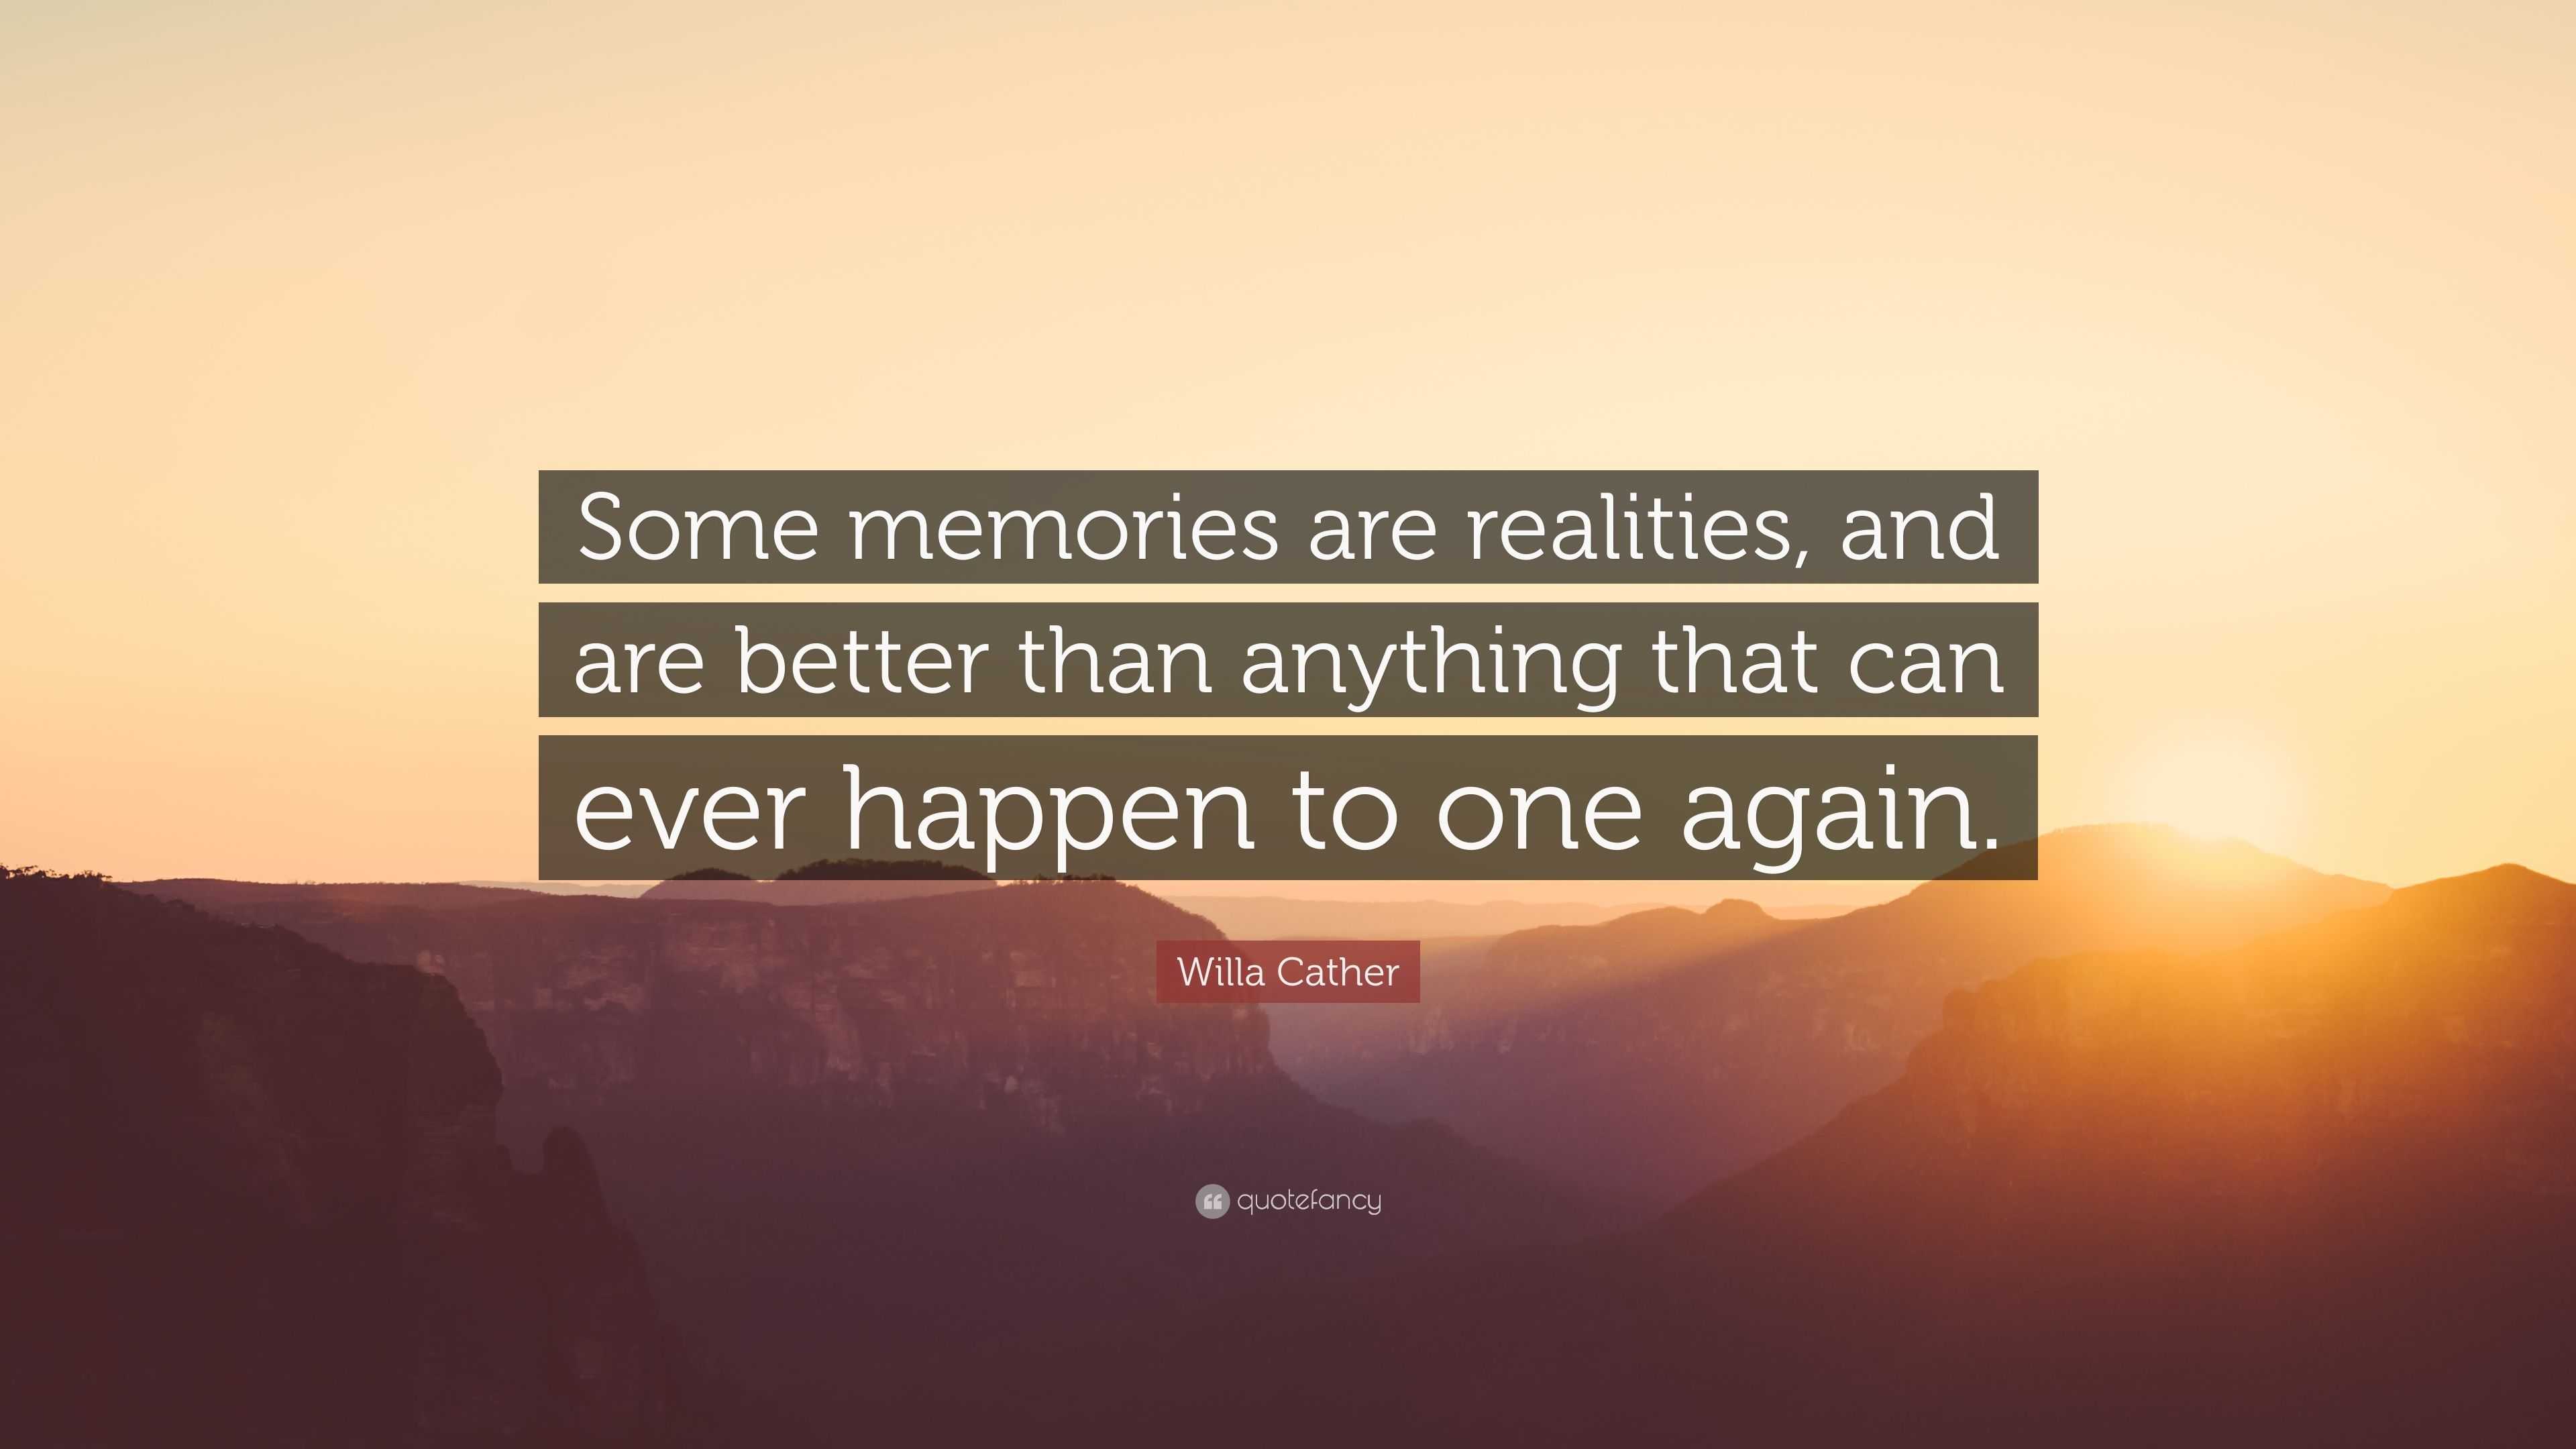 Willa Cather Quote: “Some memories are realities, and are better than ...